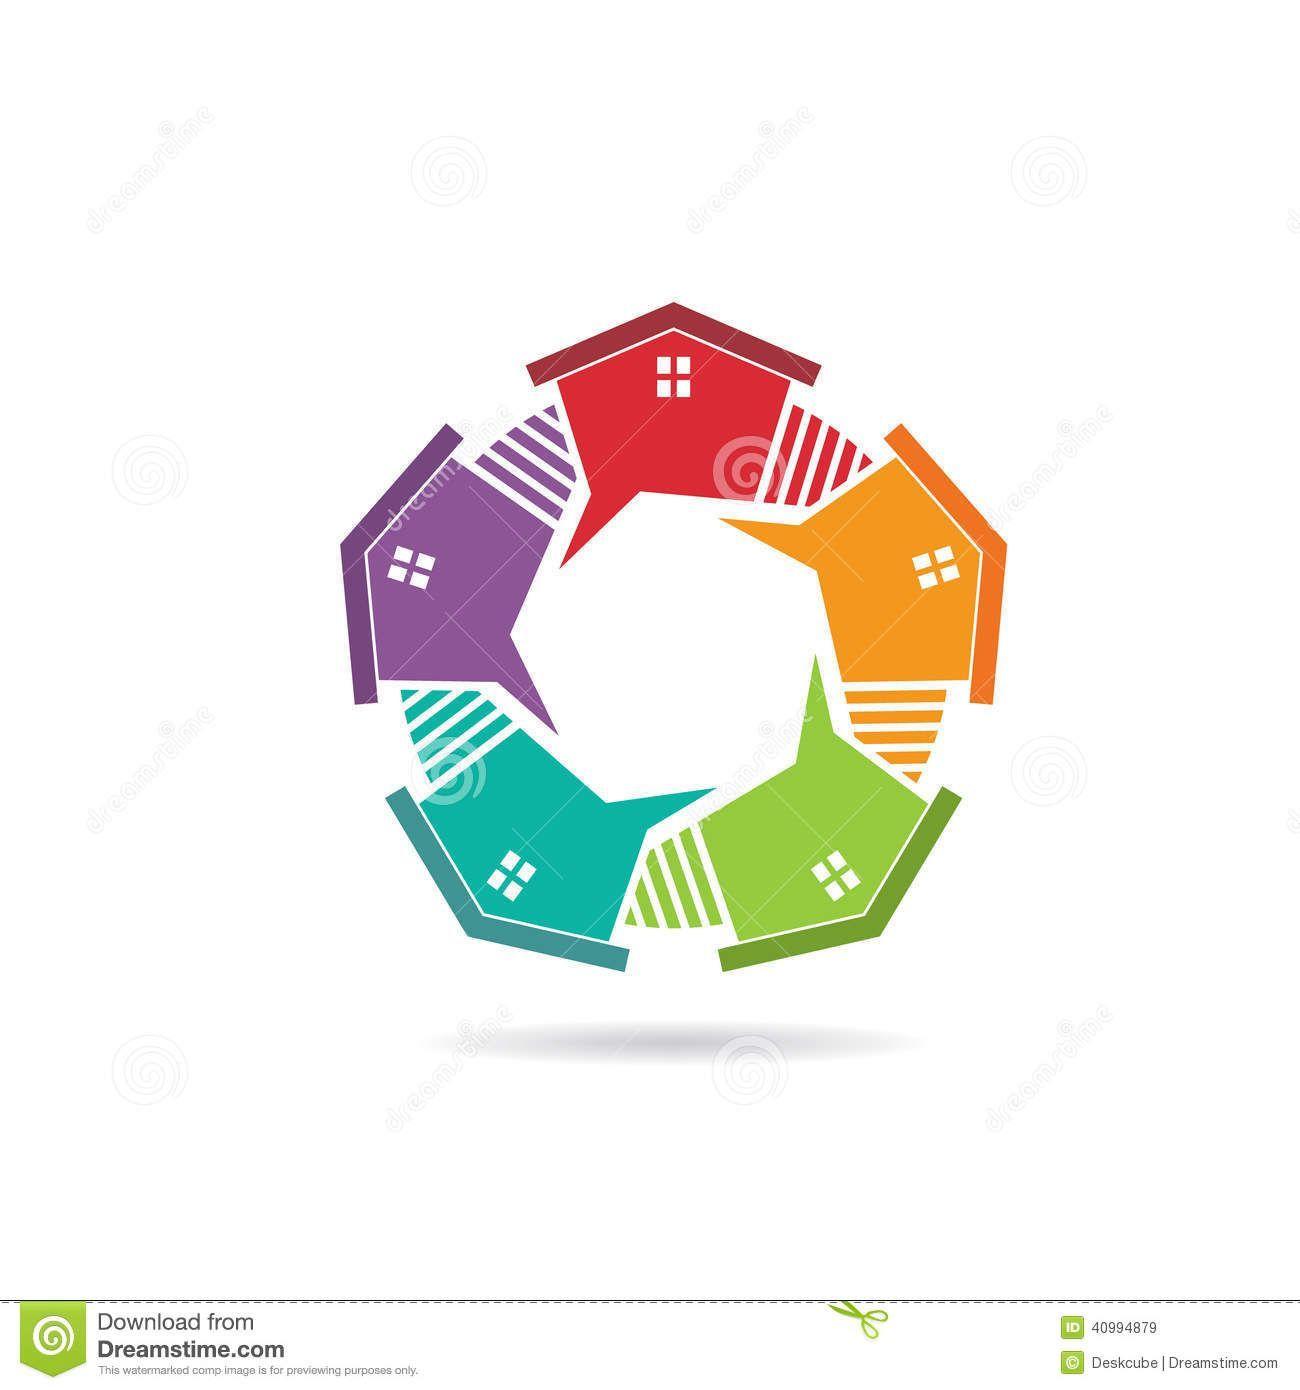 House Circle Logo - House with fence call out in circle logo. | Useful Stuff for Work ...